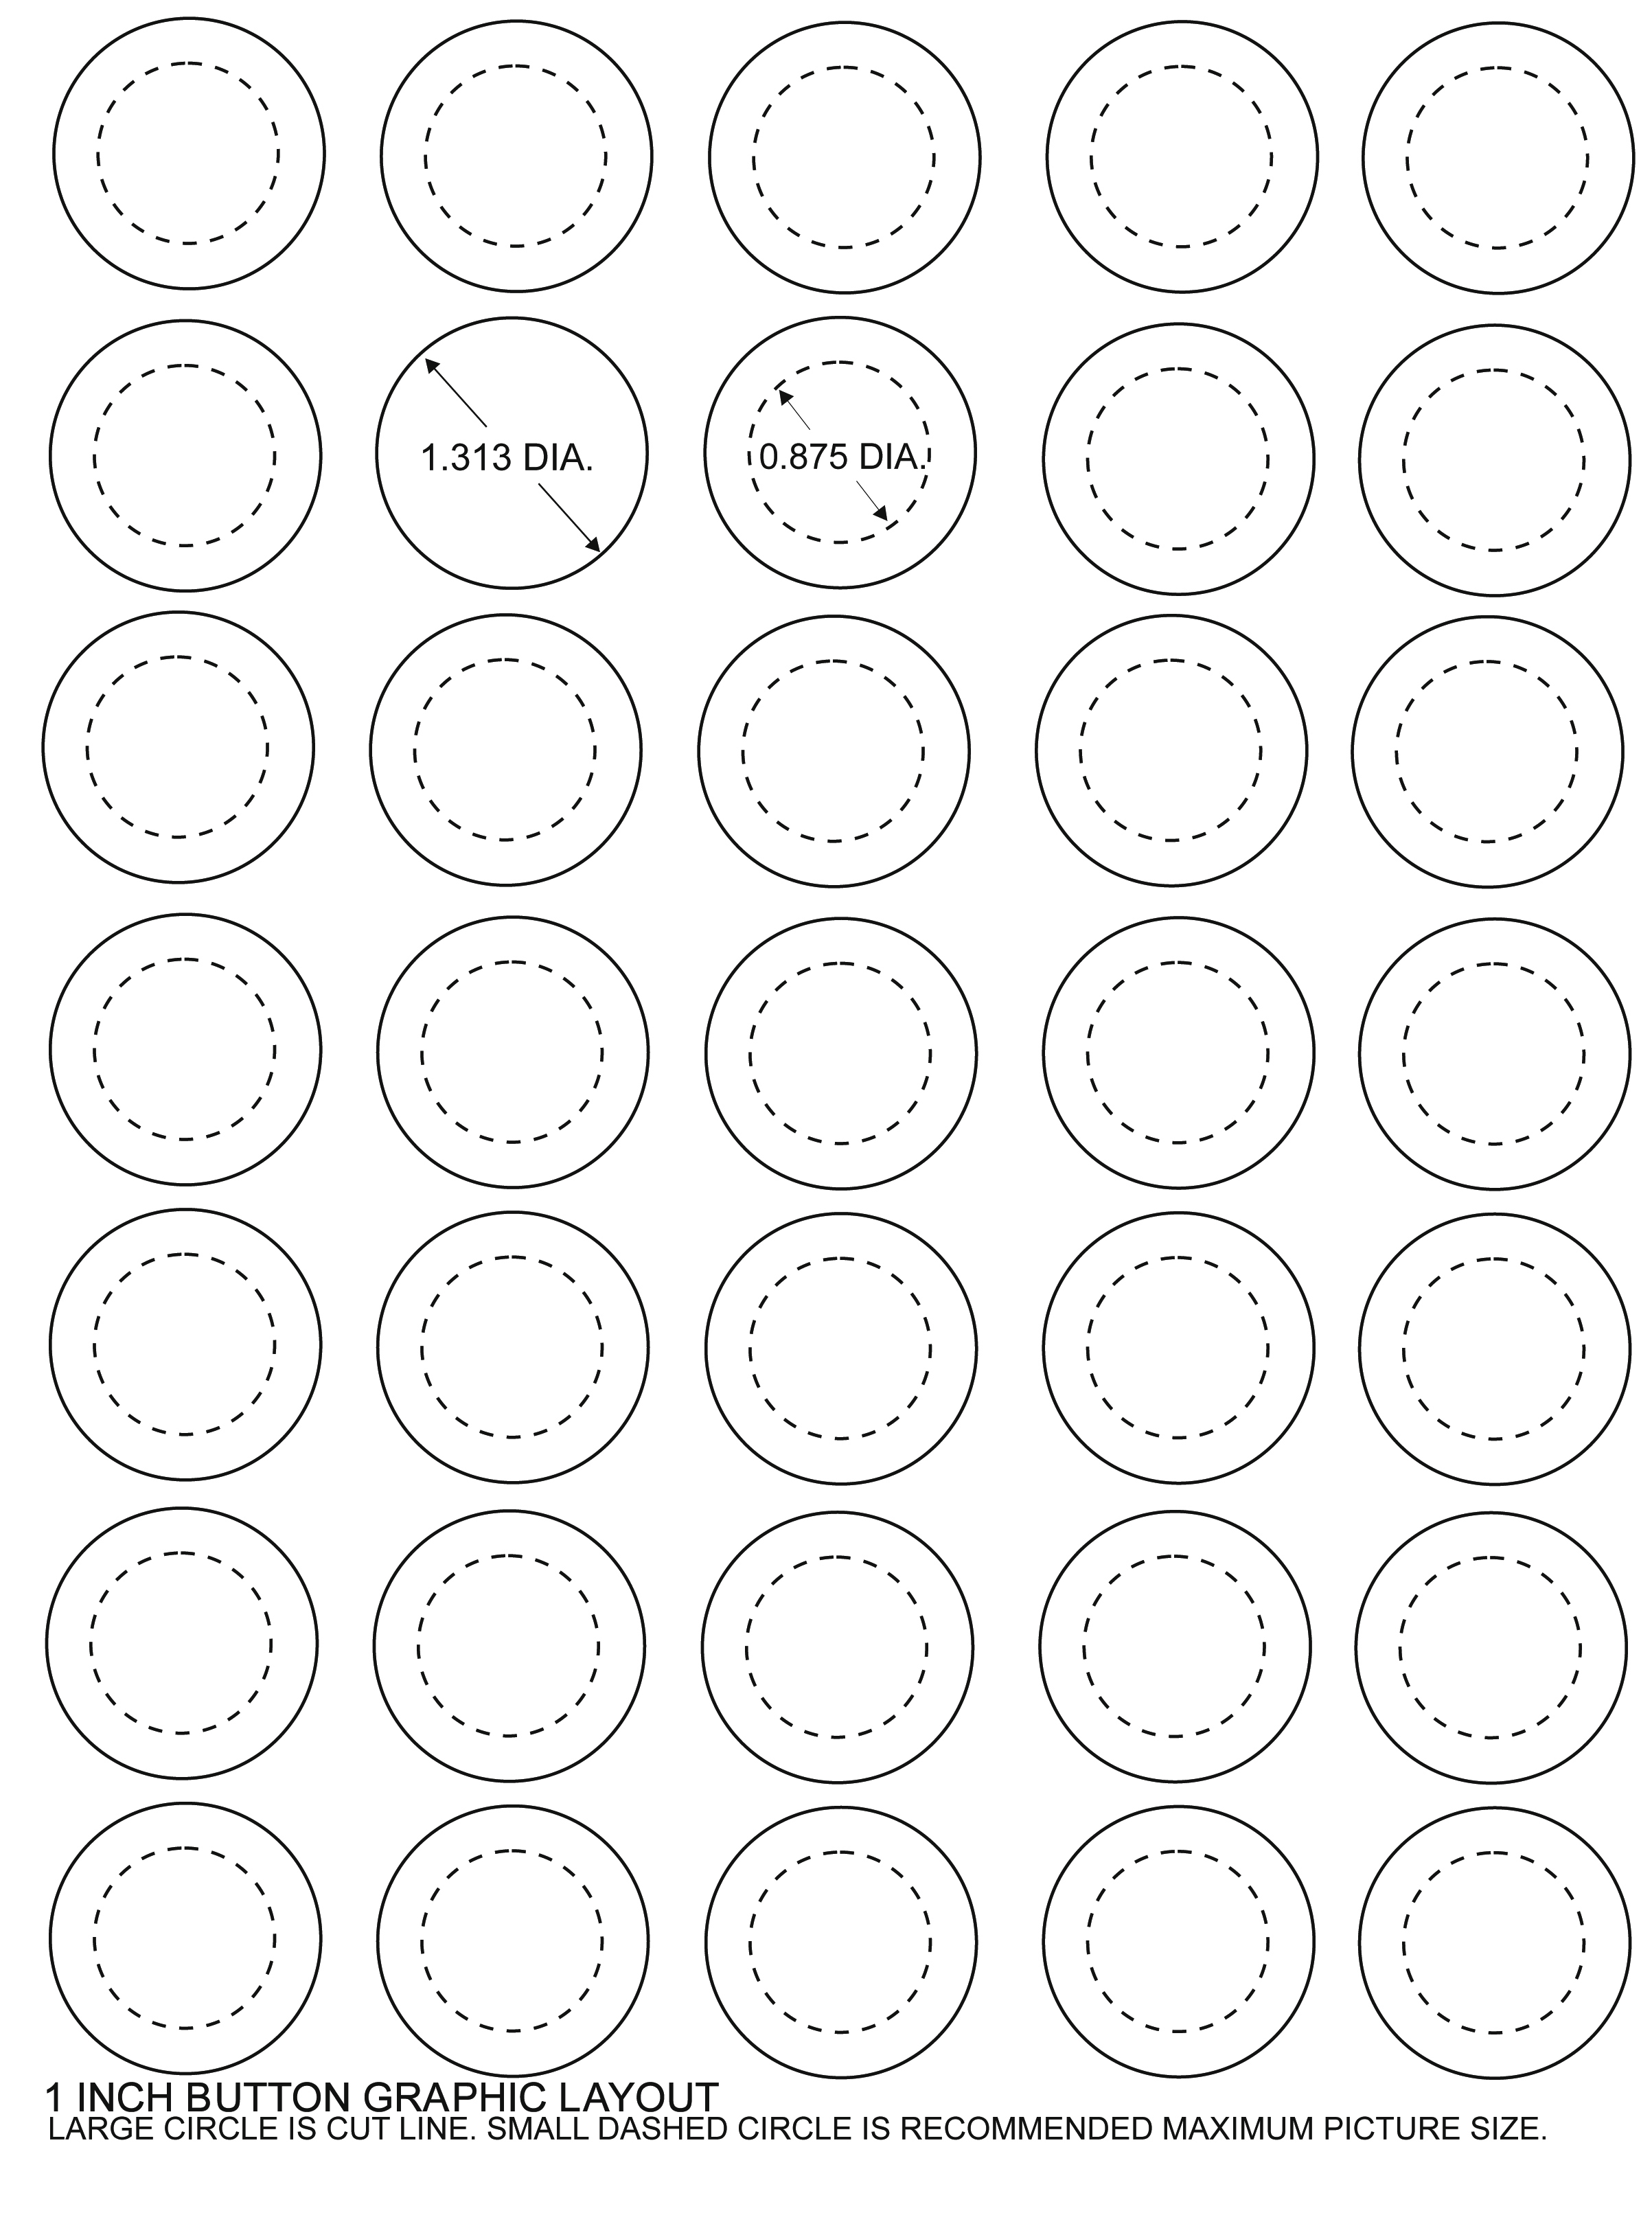 7-best-images-of-printable-button-template-mickey-mouse-button-template-printable-1-inch